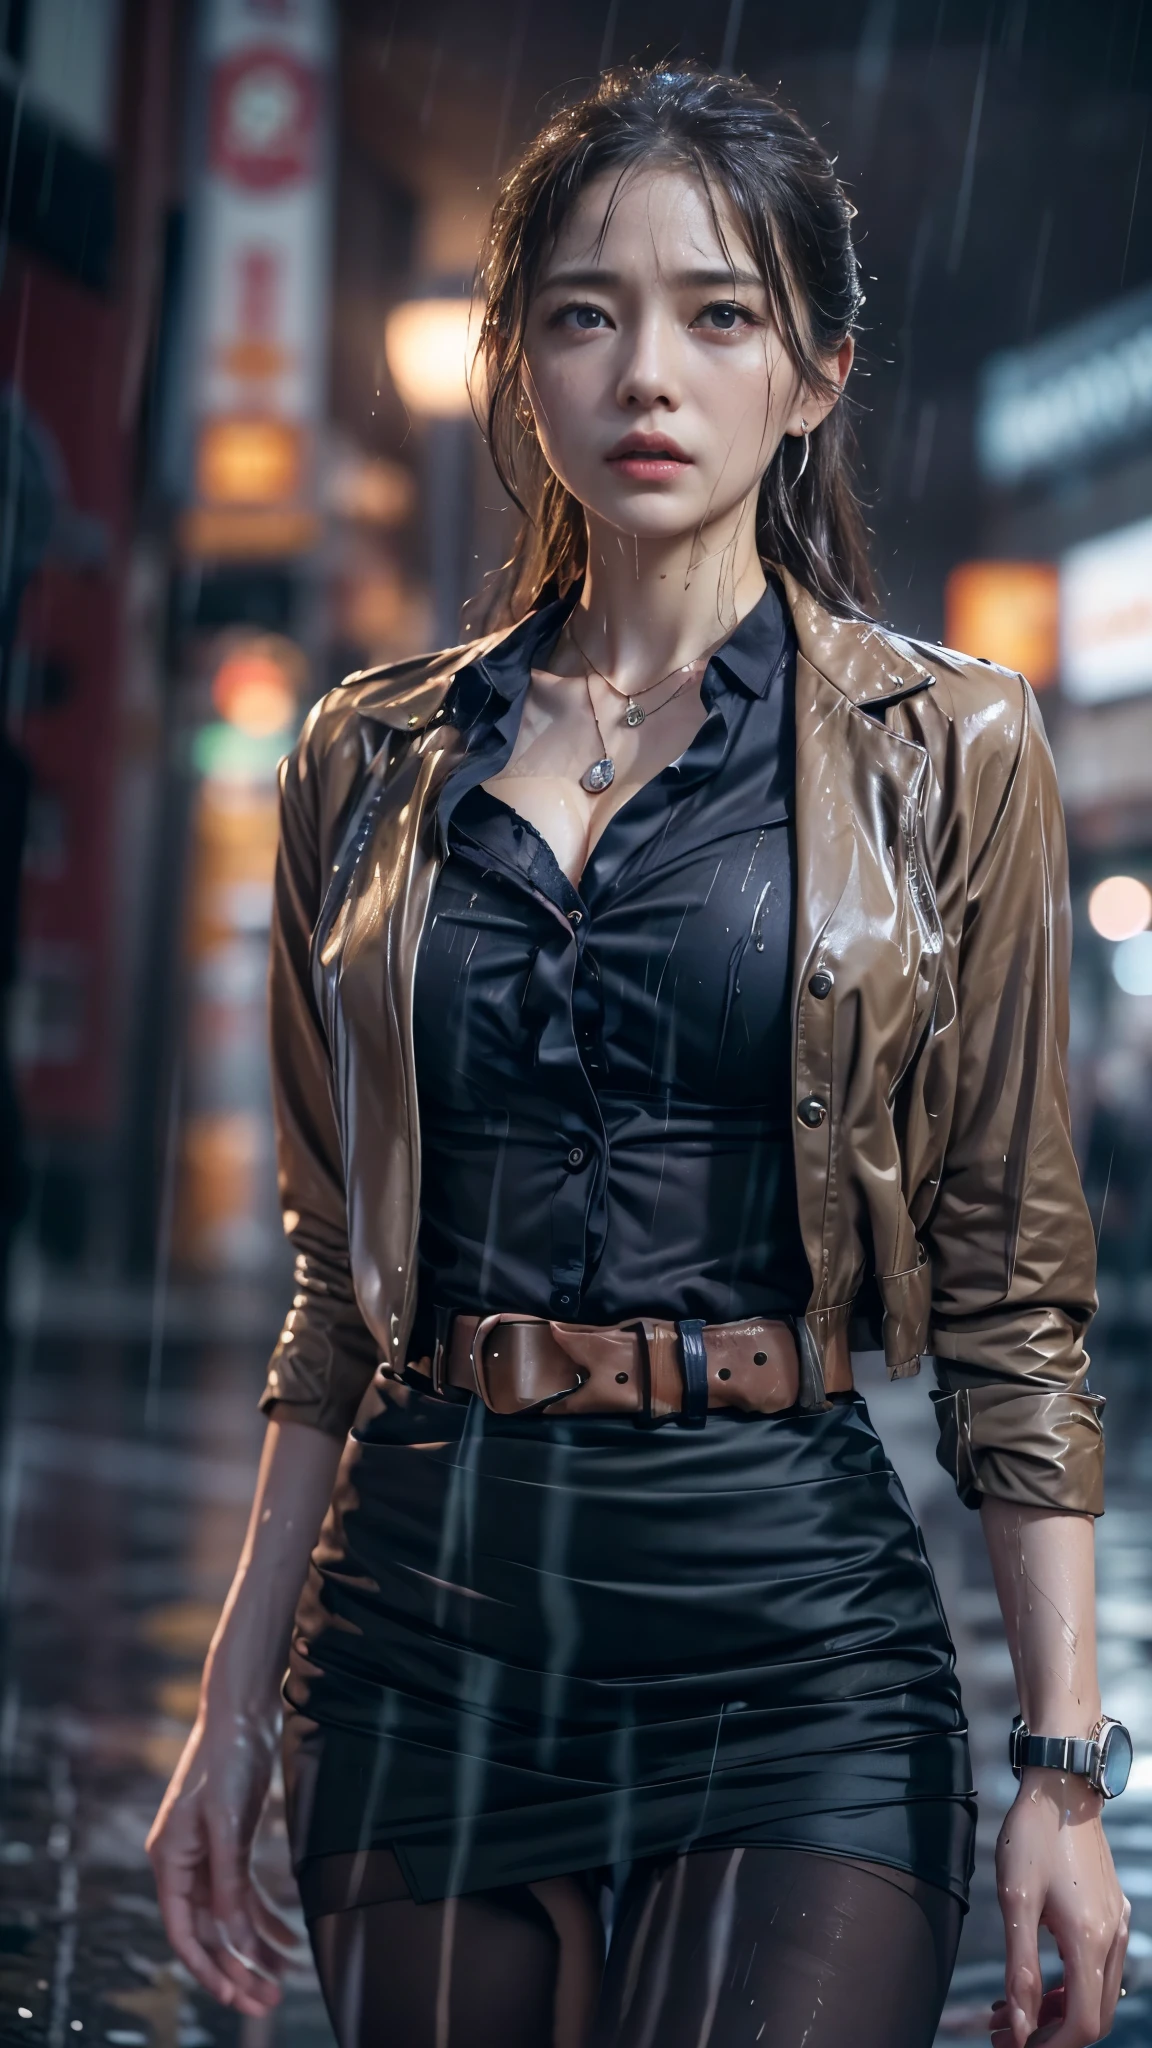 (RAW shooting, Photoreal:1.5, 8K, highest quality, masterpiece, ultra high resolution), perfect dynamic composition:1.2, Night street corner of a modern city, expression of sadness:0.5, (((Typhoon heavy rain))), Highly detailed skin and facial textures:1.2, Slim office lady wet in the rain:1.3, Fair skin:1.2, sexy beauty:1.1, perfect style:1.2, beautiful and aesthetic:1.1, very beautiful face:1.2, water droplets on the skin, (rain drips all over my body:1.2, wet body:1.2, wet hair:1.3, Wet tight skirt:1.2, wet office lady uniform:1.3), belt, (Medium chest, Bra see-through, Chest gap), (cry, lovelorn, The expression on your face when you feel intense caress, Facial expression when feeling pleasure), (beautiful blue eyes, Eyes that feel beautiful eros:0.8), (Too erotic:0.9, Bewitching:0.9), cowboy shot, Shoulder bag, necklace, earrings, bracelet, clock